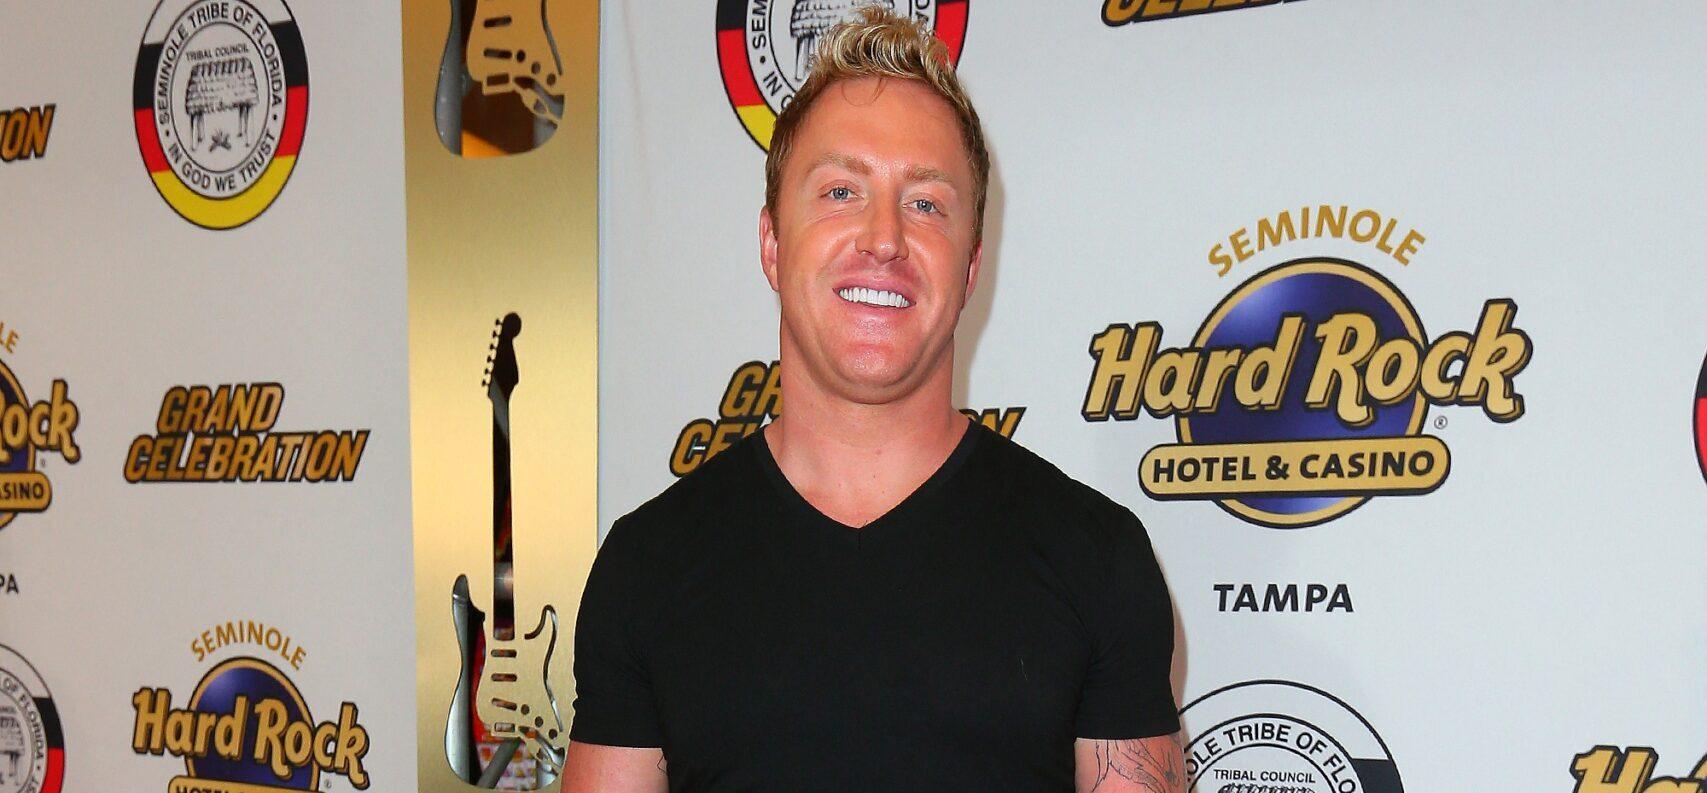 Kroy Biermann’s Fans Lift Him Up After Post About Accountability